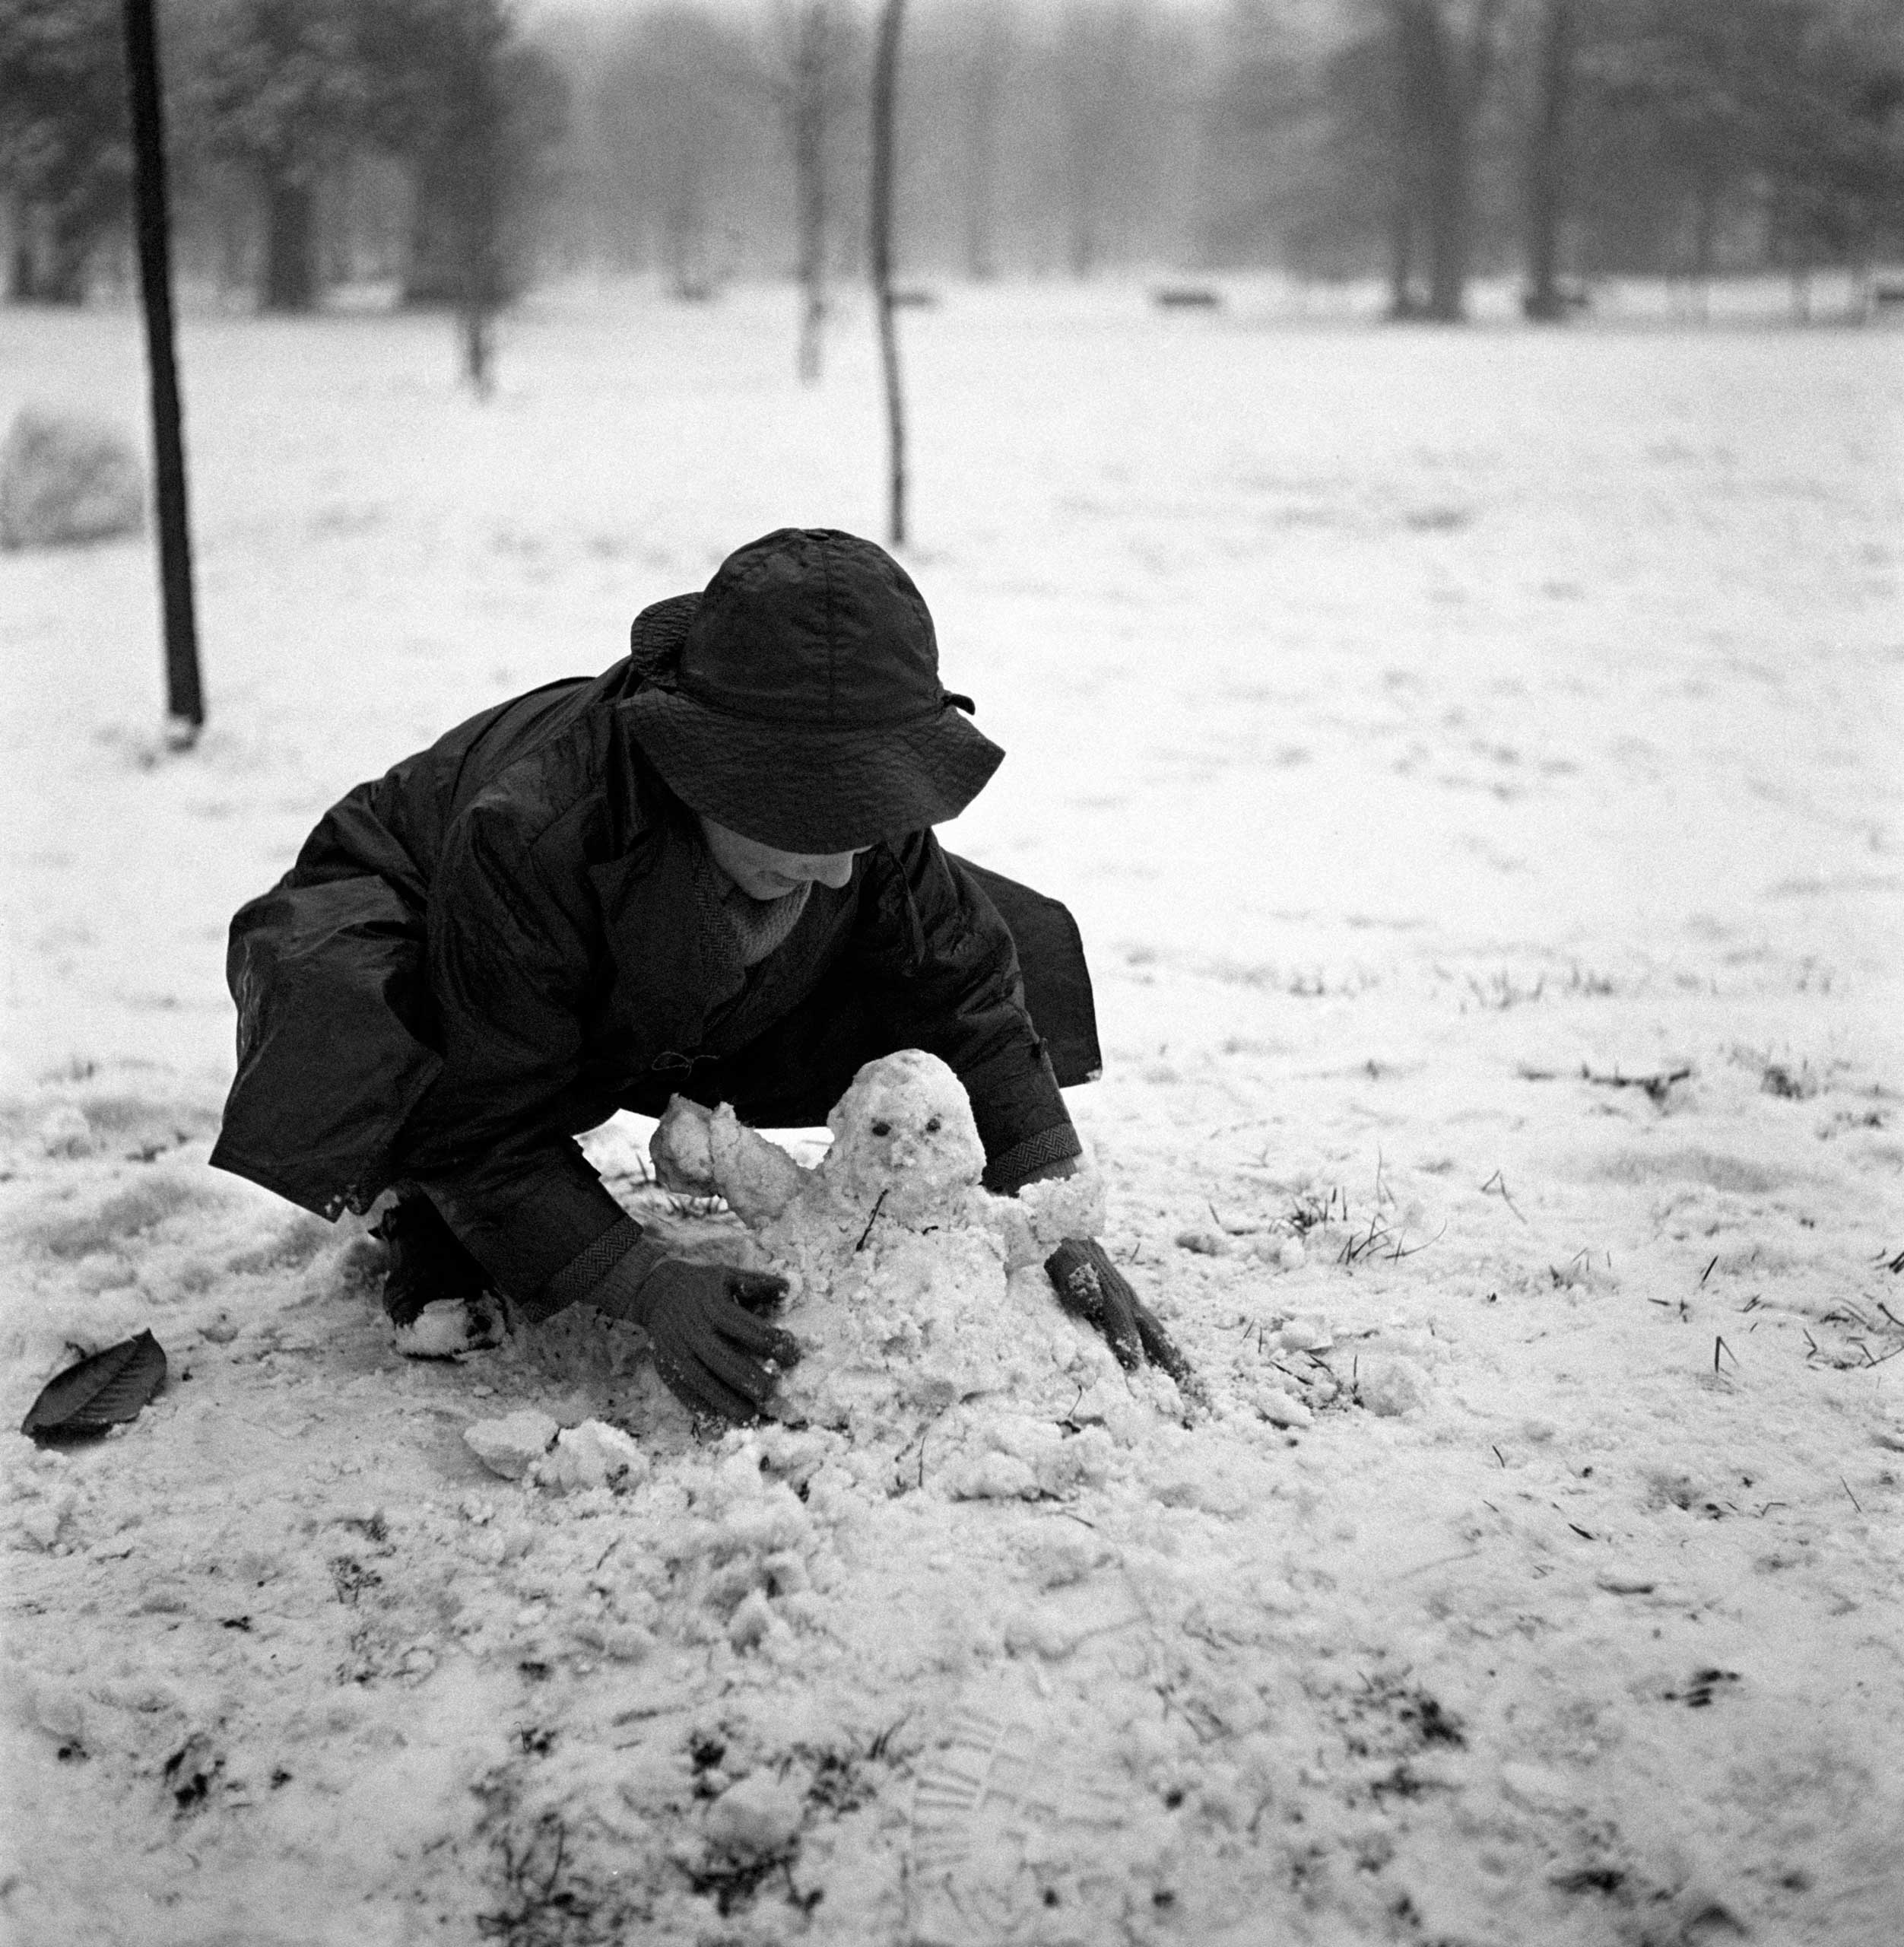 A little boy crouching and making a snowman in a park after a snowfall in Milan in the 1950s.